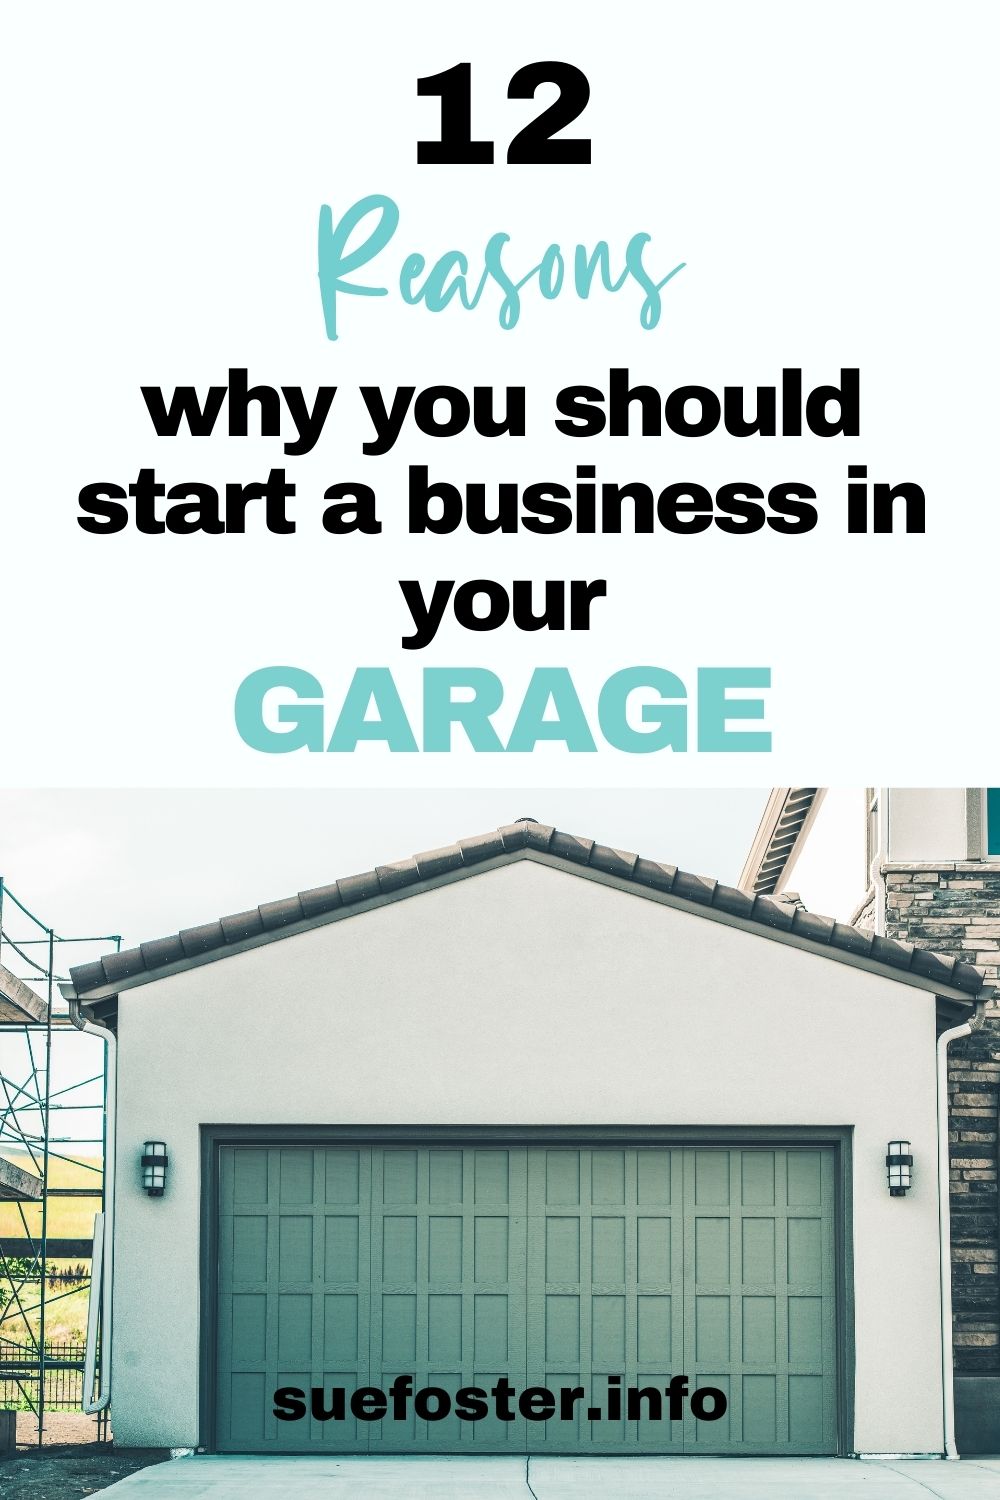 Your garage is a great place to start your own business because you will need the space, and it's relatively inexpensive.